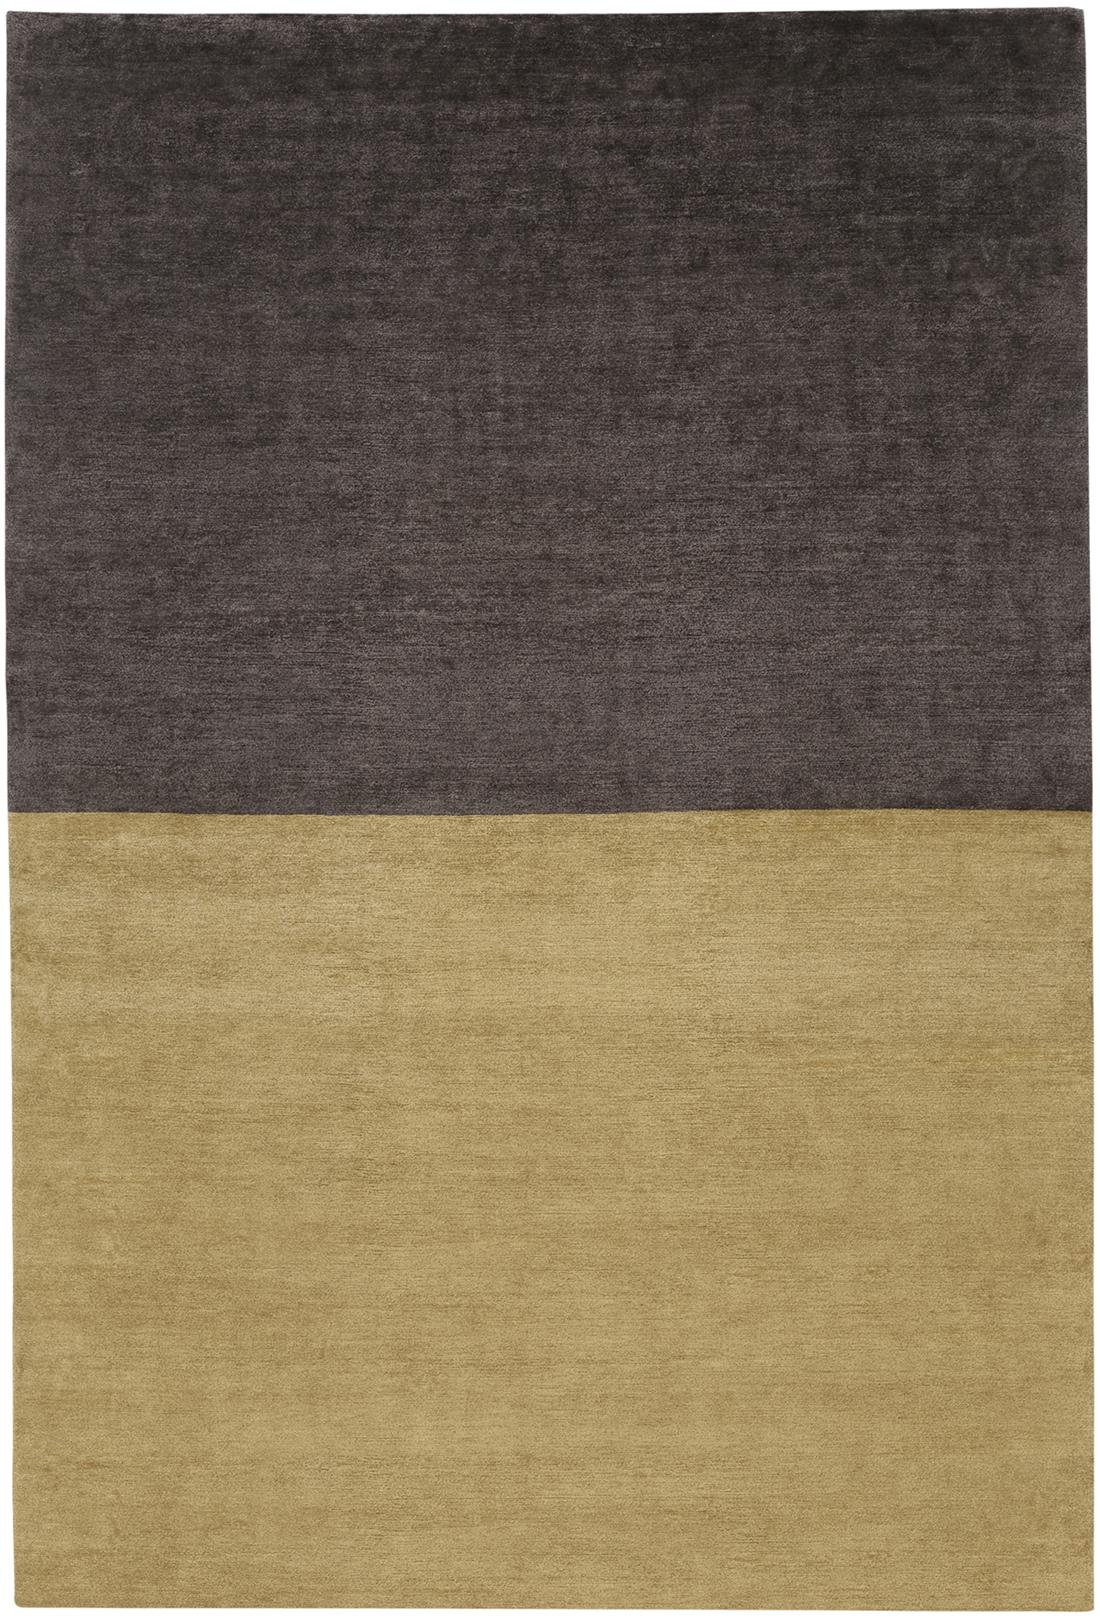 Plano rug is hand-knotted in Nepal in wool and silk (35-65%). 
Quality: 100 knots by square inch.
The colors are dark gold and purple-brown. Low pile, thickness 1 cm.